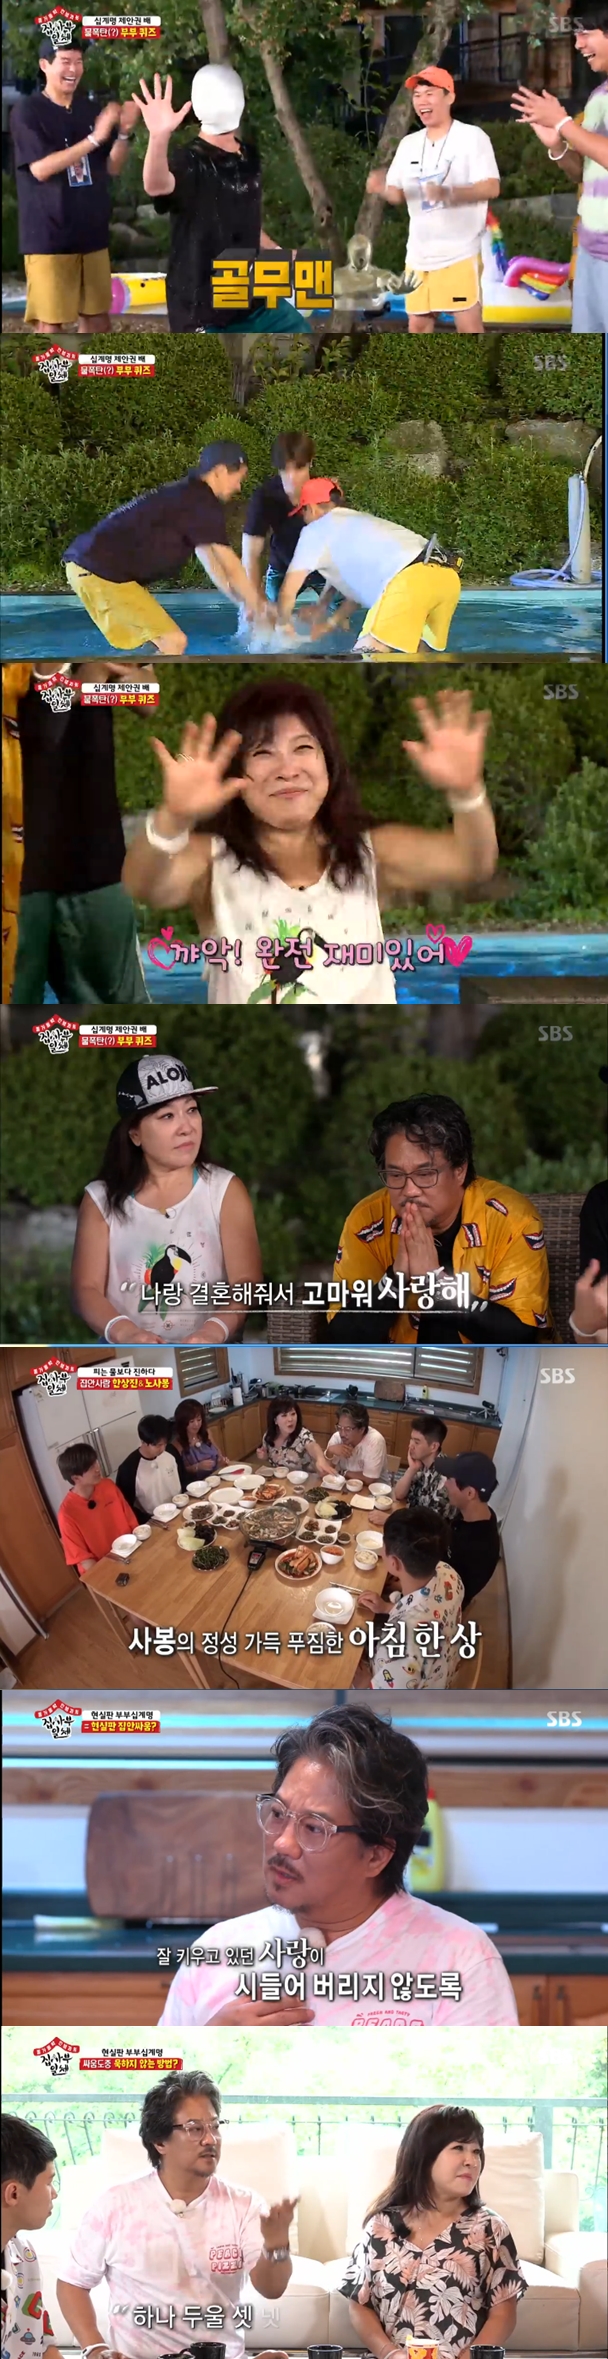 James Moosong Lee Noh Sa-yeon couple completed 10 commandments for real-life coupleIn the SBS entertainment program All The Butlers broadcasted on the afternoon of the afternoon, Noh Sa-yeon and James Moosong Lee, the representative real-life couple of the entertainment industry, came out as guests and spent the day with the members.Noh Sa-yeon and James Moosong Lee, who proposed to make the Ten Commandments with the members of the Reality Couple, also focused on filling the Ten Commandments this week.Lee Seung-gi and Yook Seong-jae stood up tight, supporting Lee Sang-yoon and Yang Se-chan with James Moosong Lee.Lee Seung-gi suggested that the team that got the quiz on the couple arbitrarily added a commandment, and the James Moosong Lee team agreed.Noh Sa-yeon, who first raised the problem, remembered what he had said in the past broadcast and said, I even thought about it when my husband was hateful.The members shouted evil thoughts such as I want the bed to collapse.However, the answer was I hope the frame hanging on the bed falls, and the members and James Moosong Lee listened to it and looked at Noh Sa-yeon with anxious eyes.Lee Seung-gi got the right answer, and Lee Sang-yoon and Yang Se-hyeong did James Moosong Lee Game to avoid thimble penalties.Game results Lee Sang-yoon lost, and Lee Seung-gi was excited and received water from the swimming cap.Lee Sang-yoon advised, You shouldnt be that far away, but Lee Seung-gi didnt listen.Eventually, the swimmer who left Lee Seung-gis hand threw water at Lee Sang-yoon and fell off, and Lee Sang-yoon laughed at me, saying, I told you not to do that.The second answer to the question was Yang Se-hyeong.James Moosong Lee said, My wife like a flower deer has a reason to be called a power deer for others. Yang Se-hyeong shouted arm wrestling.Lee Seung-gi was convinced that it was wrong, saying, It can not be that easy.But arm wrestling was the right answer, and Lee Seung-gi personally experienced her strength by wrestling with Noh Sa-yeon.Yang Se-hyeong and Lee Sang-yoon, who won the quiz showdown, added a new commandment.Yang Se-hyeong said, I decided this with my childs heart. Before going to bed at Moy Yat night, I suggested to each other, Thank you for marrying me, I love you.This will allow Moy Yat to get a little closer to each other, he added.When James Moosong Lee and Noh Sa-yeon heard this, they could not hide their embarrassed expressions.James Moosong Lee said frankly, I do not want to say this, but it is a little embarrassing. But soon he made an appointment with the members, saying, I will do it from tonight.In fact, James Moosong Lee embraced her, warmly telling Noh Sa-yeon Thank you for marrying me, I love you before bed.The next morning I came to see Noh Sa-yeon and James Moosong Lee with a surprise guest, Han Sang-jin and Nosabong.Noh Sa-bong and Han Sang-jin were both family members of the Noh Sa-yeon and related family.As soon as he arrived, he made breakfast for the members and two people and became a strong support for Noh Sa-yeon.James Moosong Lee also saw Han Sang-jin and said, I feel like an emergency exit when you come.The members were glad to see the two, but they could not hide their embarrassment.Lee Seung-gi, who was less awake, was embarrassed to see Han Sang-jin and said, How did you come here?Noh Sa-yeon kindly explained that he was related, and Lee Seung-gi also grasped the situation.Yang Se-hyeong was pleased to see the morning image that was warmly prepared and said, It is a family-like atmosphere.Han Sang-jin laughed directly, saying, I do not feel like Moy Yat on 365 days.Han Sang-jin informed members who could not adapt about the reality of the Roh family.When Lee Seung-gi was surprised that the audio does not empty for seven minutes is really amazing, Han Sang-jin replied, It is overdose now.He said, The family of Mr. Roh is very excited, Lee Sang-yoon said, When I come to my house, entertainment will be quick.Han Sang-jin challenged Noh Sa-yeon and James Moosong Lee by looking at six confirmed items of the ten commandments they had made the day before.He saw the second commandment, Do not pack sesame leaves to Lee Sung, and laughed, saying, Noh Sa-yeon basically does not eat sesame leaves.Han Sang-jin spoke of the reality of Mr. Rohs family and supported James Moosong Lee.My family sees my family directly to the village, he said. My family did not show up because I was surprised when James Moosong Lee first came home.Han Sang-jin said, James Moosong Lee was a popular singer at the time, but I could not get strength in my house.During breakfast, James Moosong Lee and Noh Sa-yeon created a new Ten Commandments.James Moosong Lee said, I really love Noh Sa-yeon and sometimes I do not love me.Upon hearing this, Yang Se-hyeong added to the new Ten Commandments, saying, Lets set that word as a forbidden word.Han Sang-jin supported his proposal, saying, Noh Sa-yeon is 0th to James Moosong Lee.James Moosong Lee and Noh Sa-yeon completed the Ten Commandments of Real Couples after breakfast, adding not sour with the members to their new commandments.